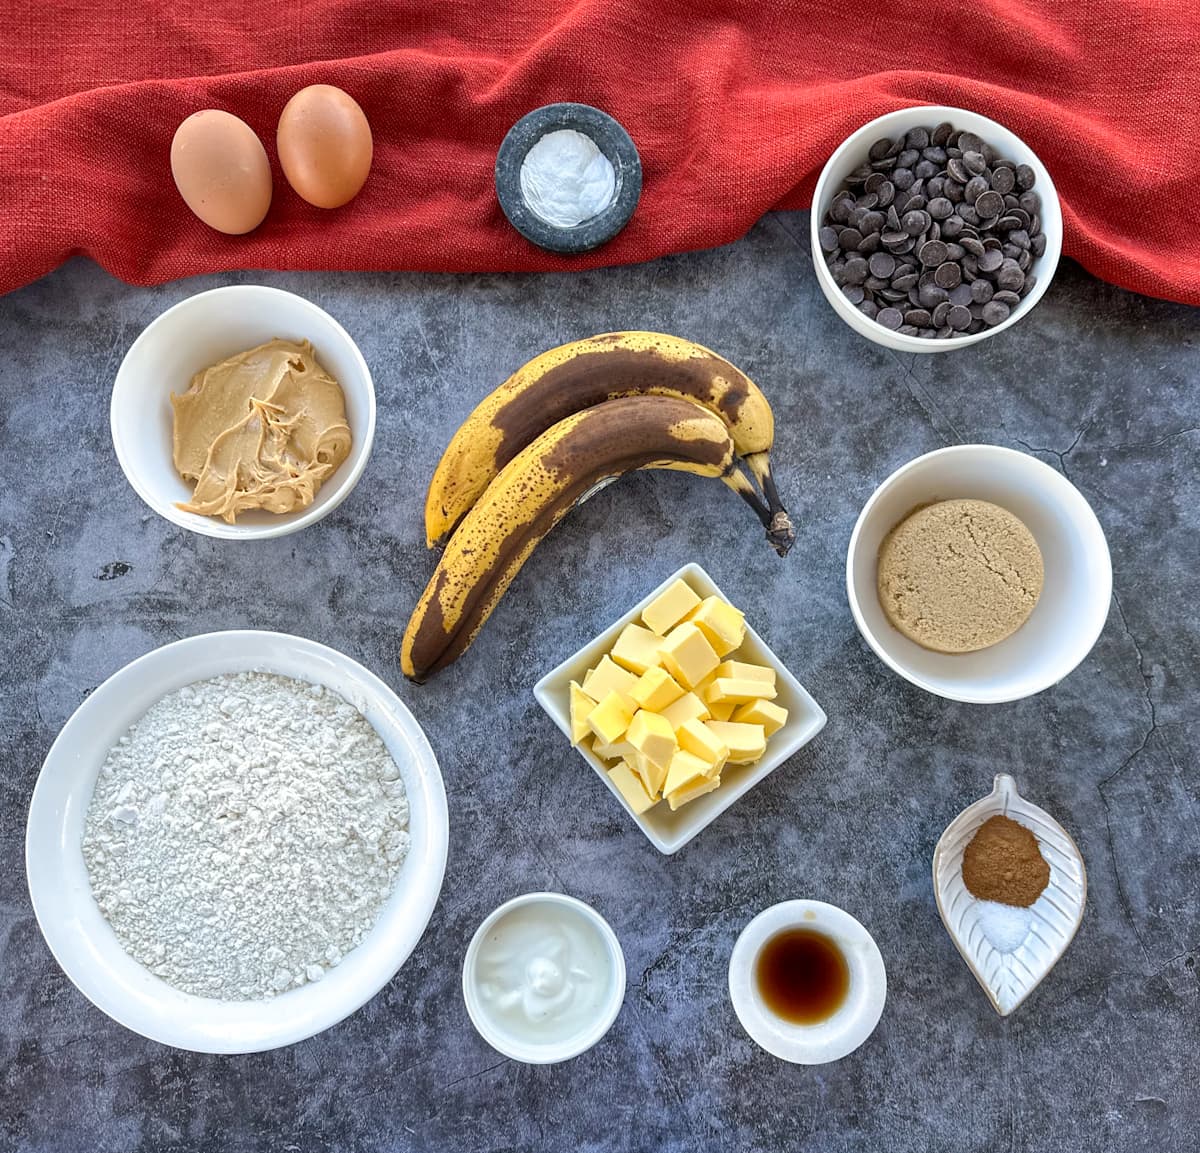 Ingredients used to make peanut butter banana chocolate chip muffins